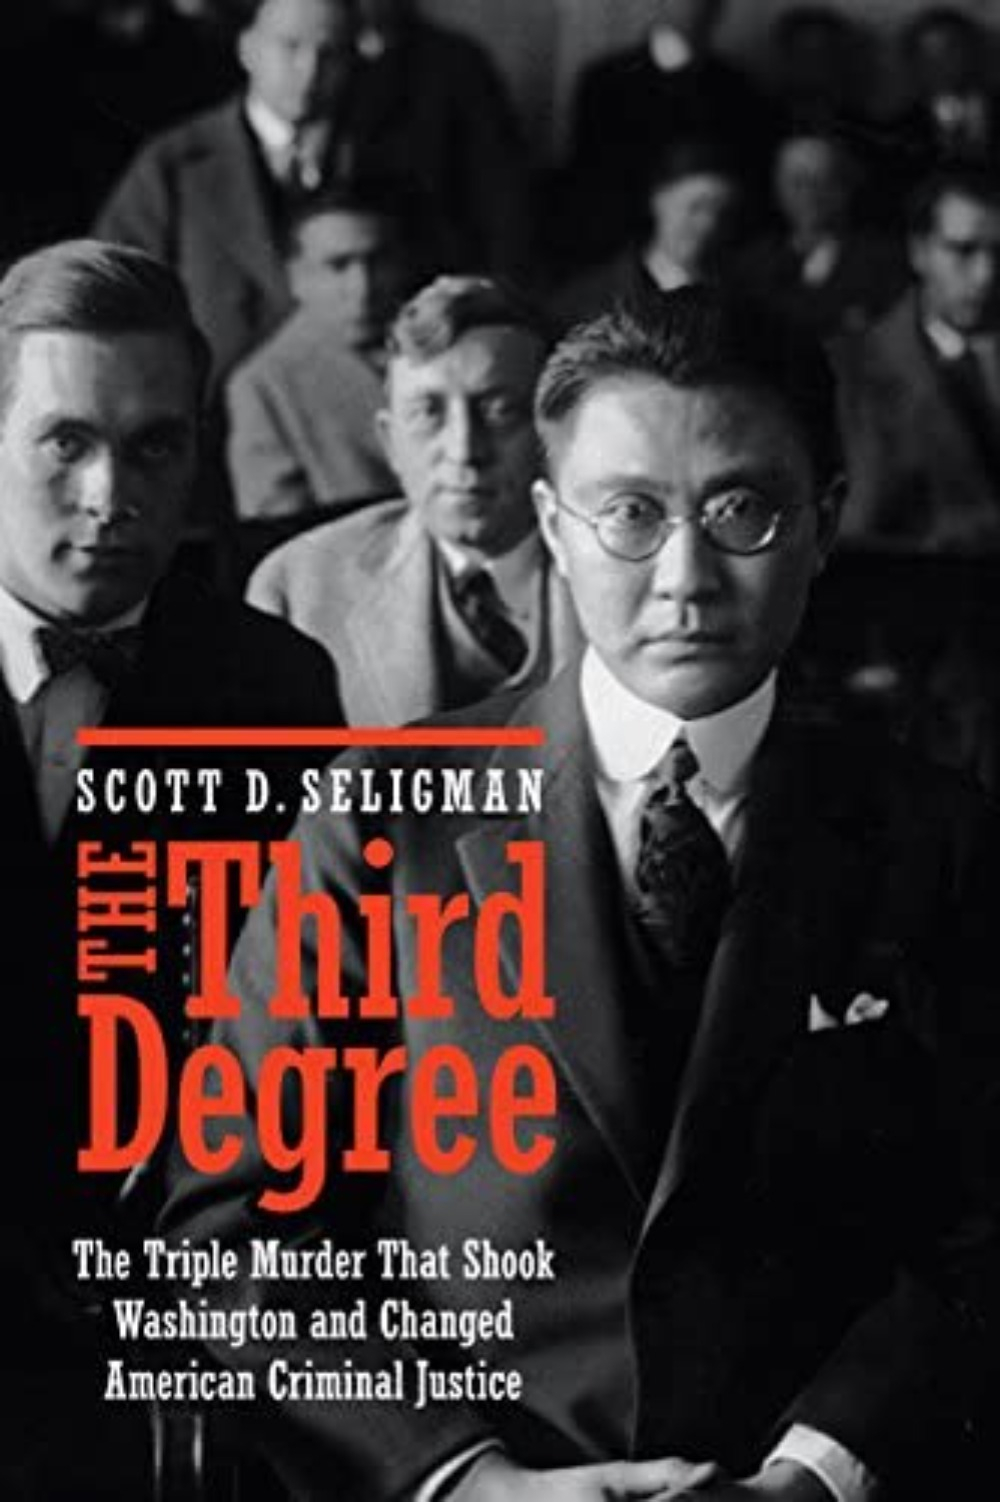 The Third Degree by Scott Seligman